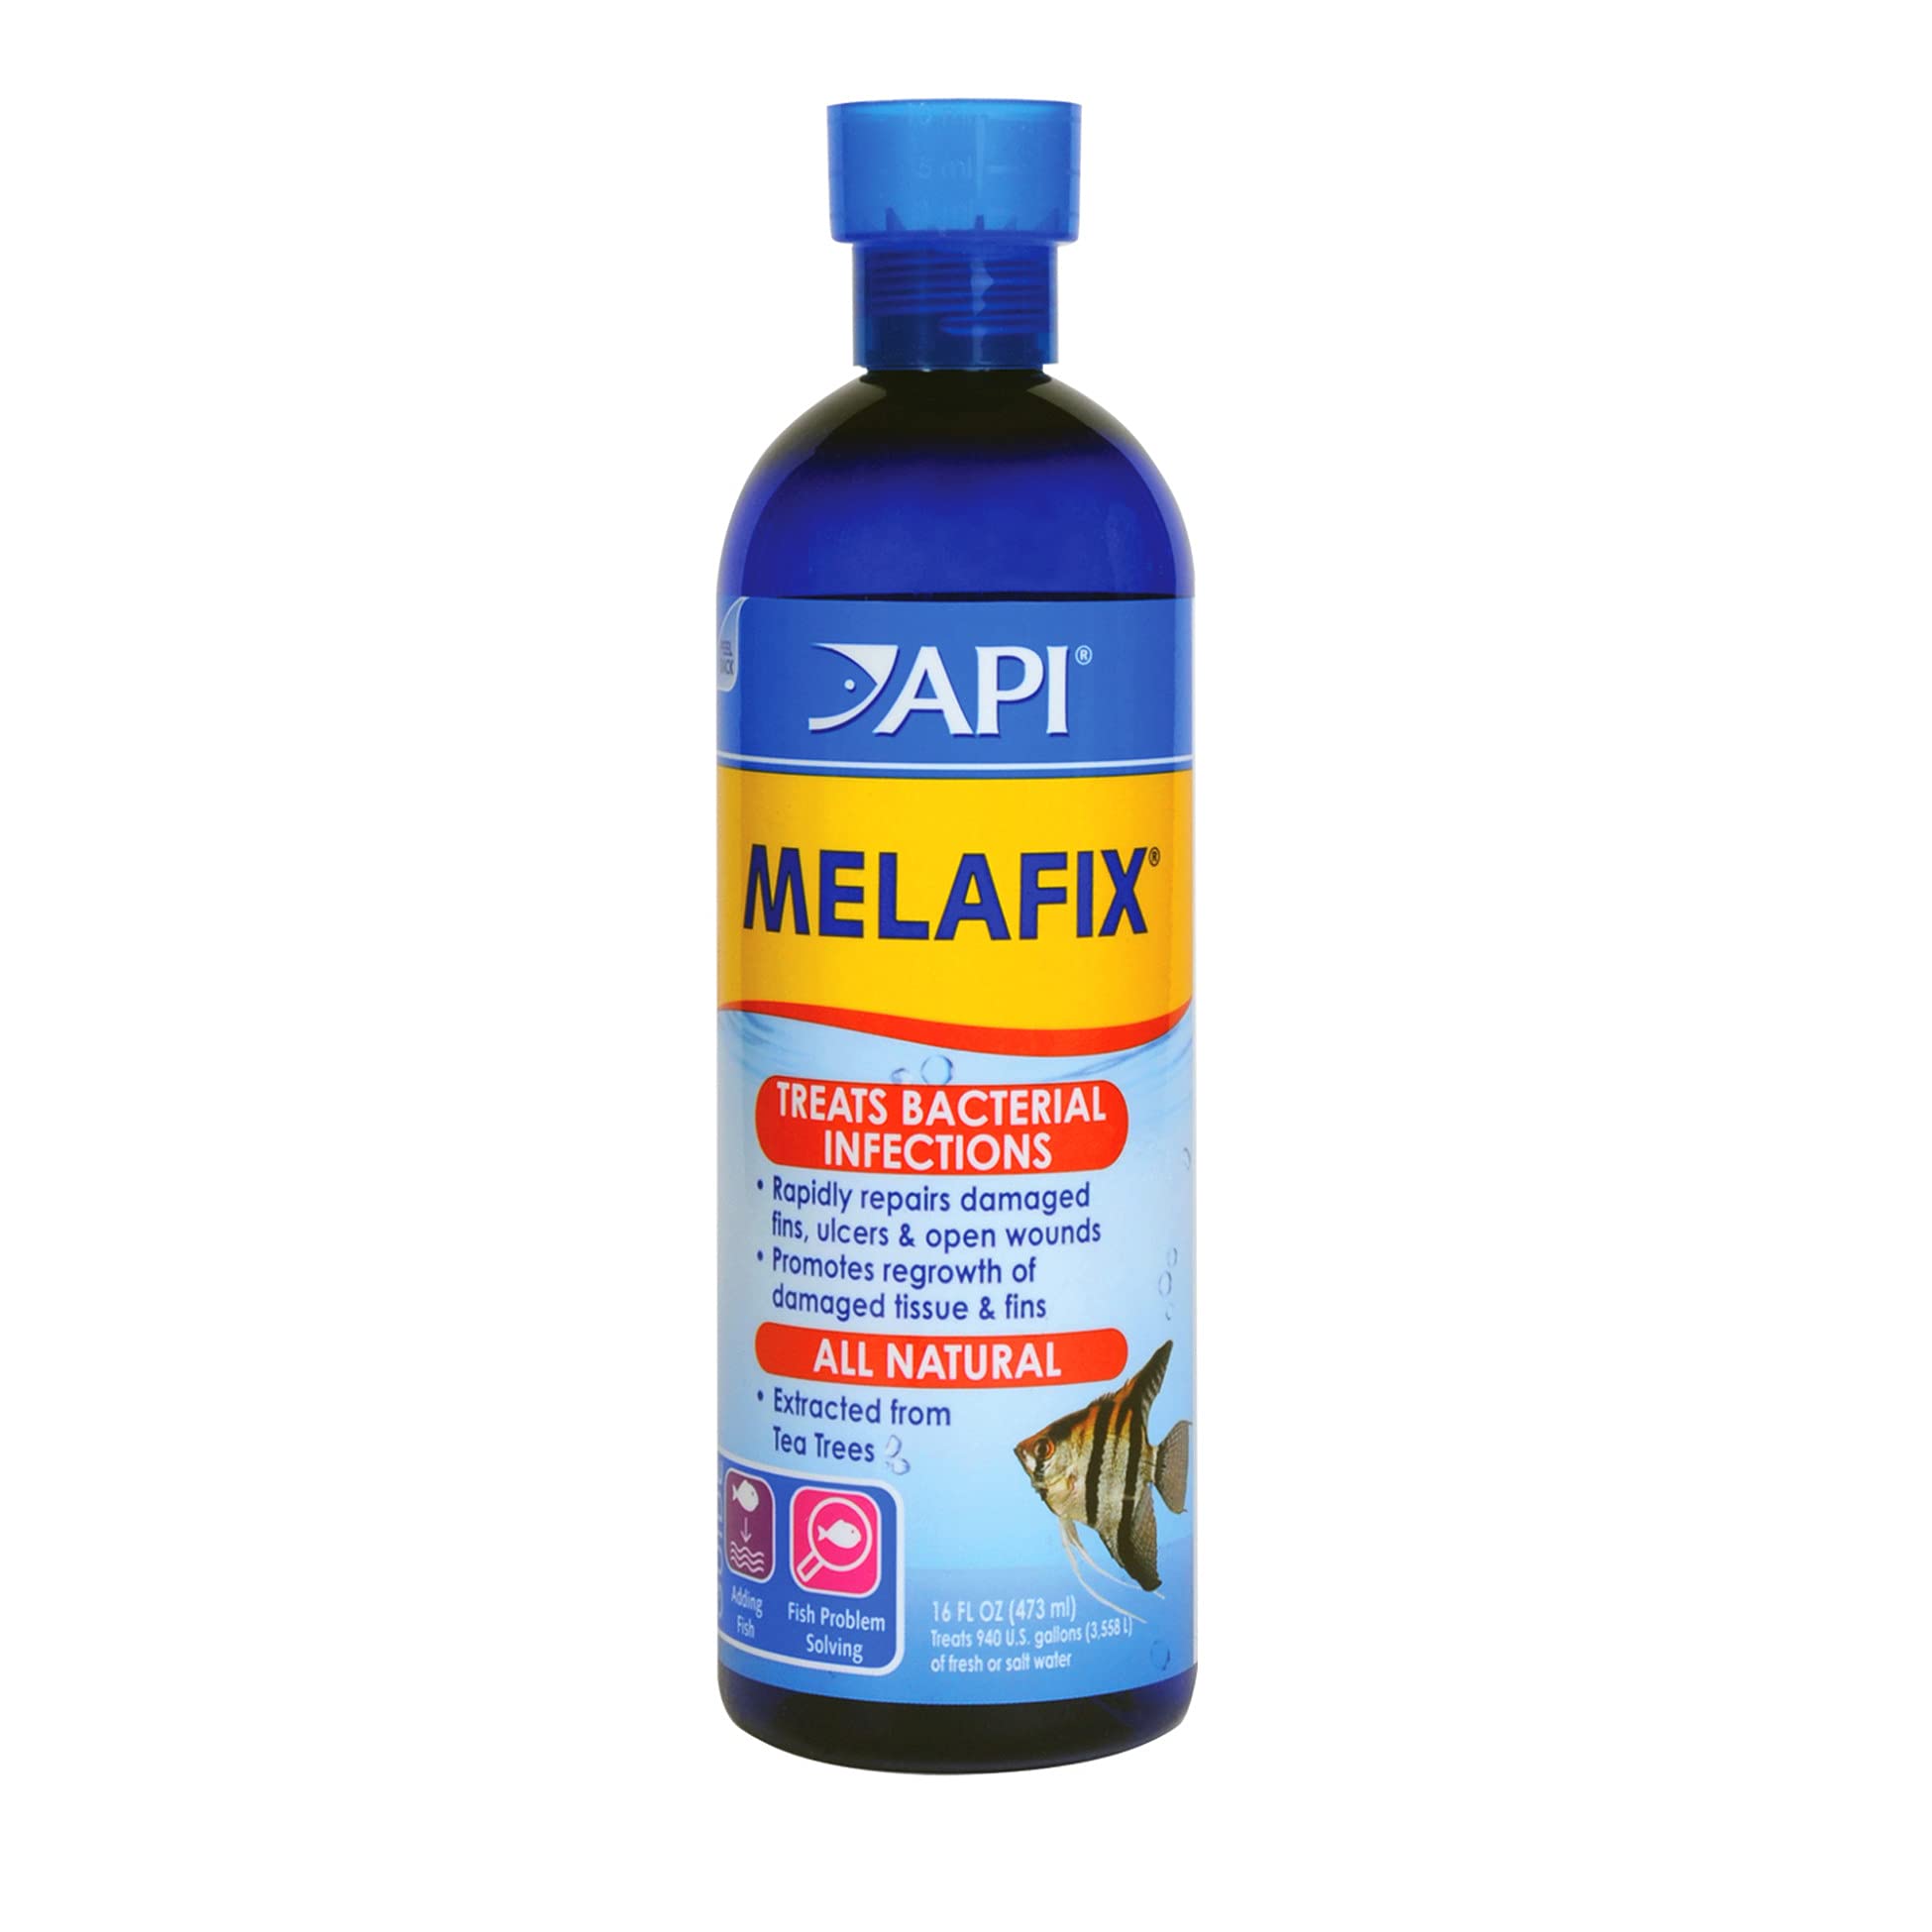 API MELAFIX: 4-Ounce Bottle for Freshwater Fish Bacterial Infection Remedy.